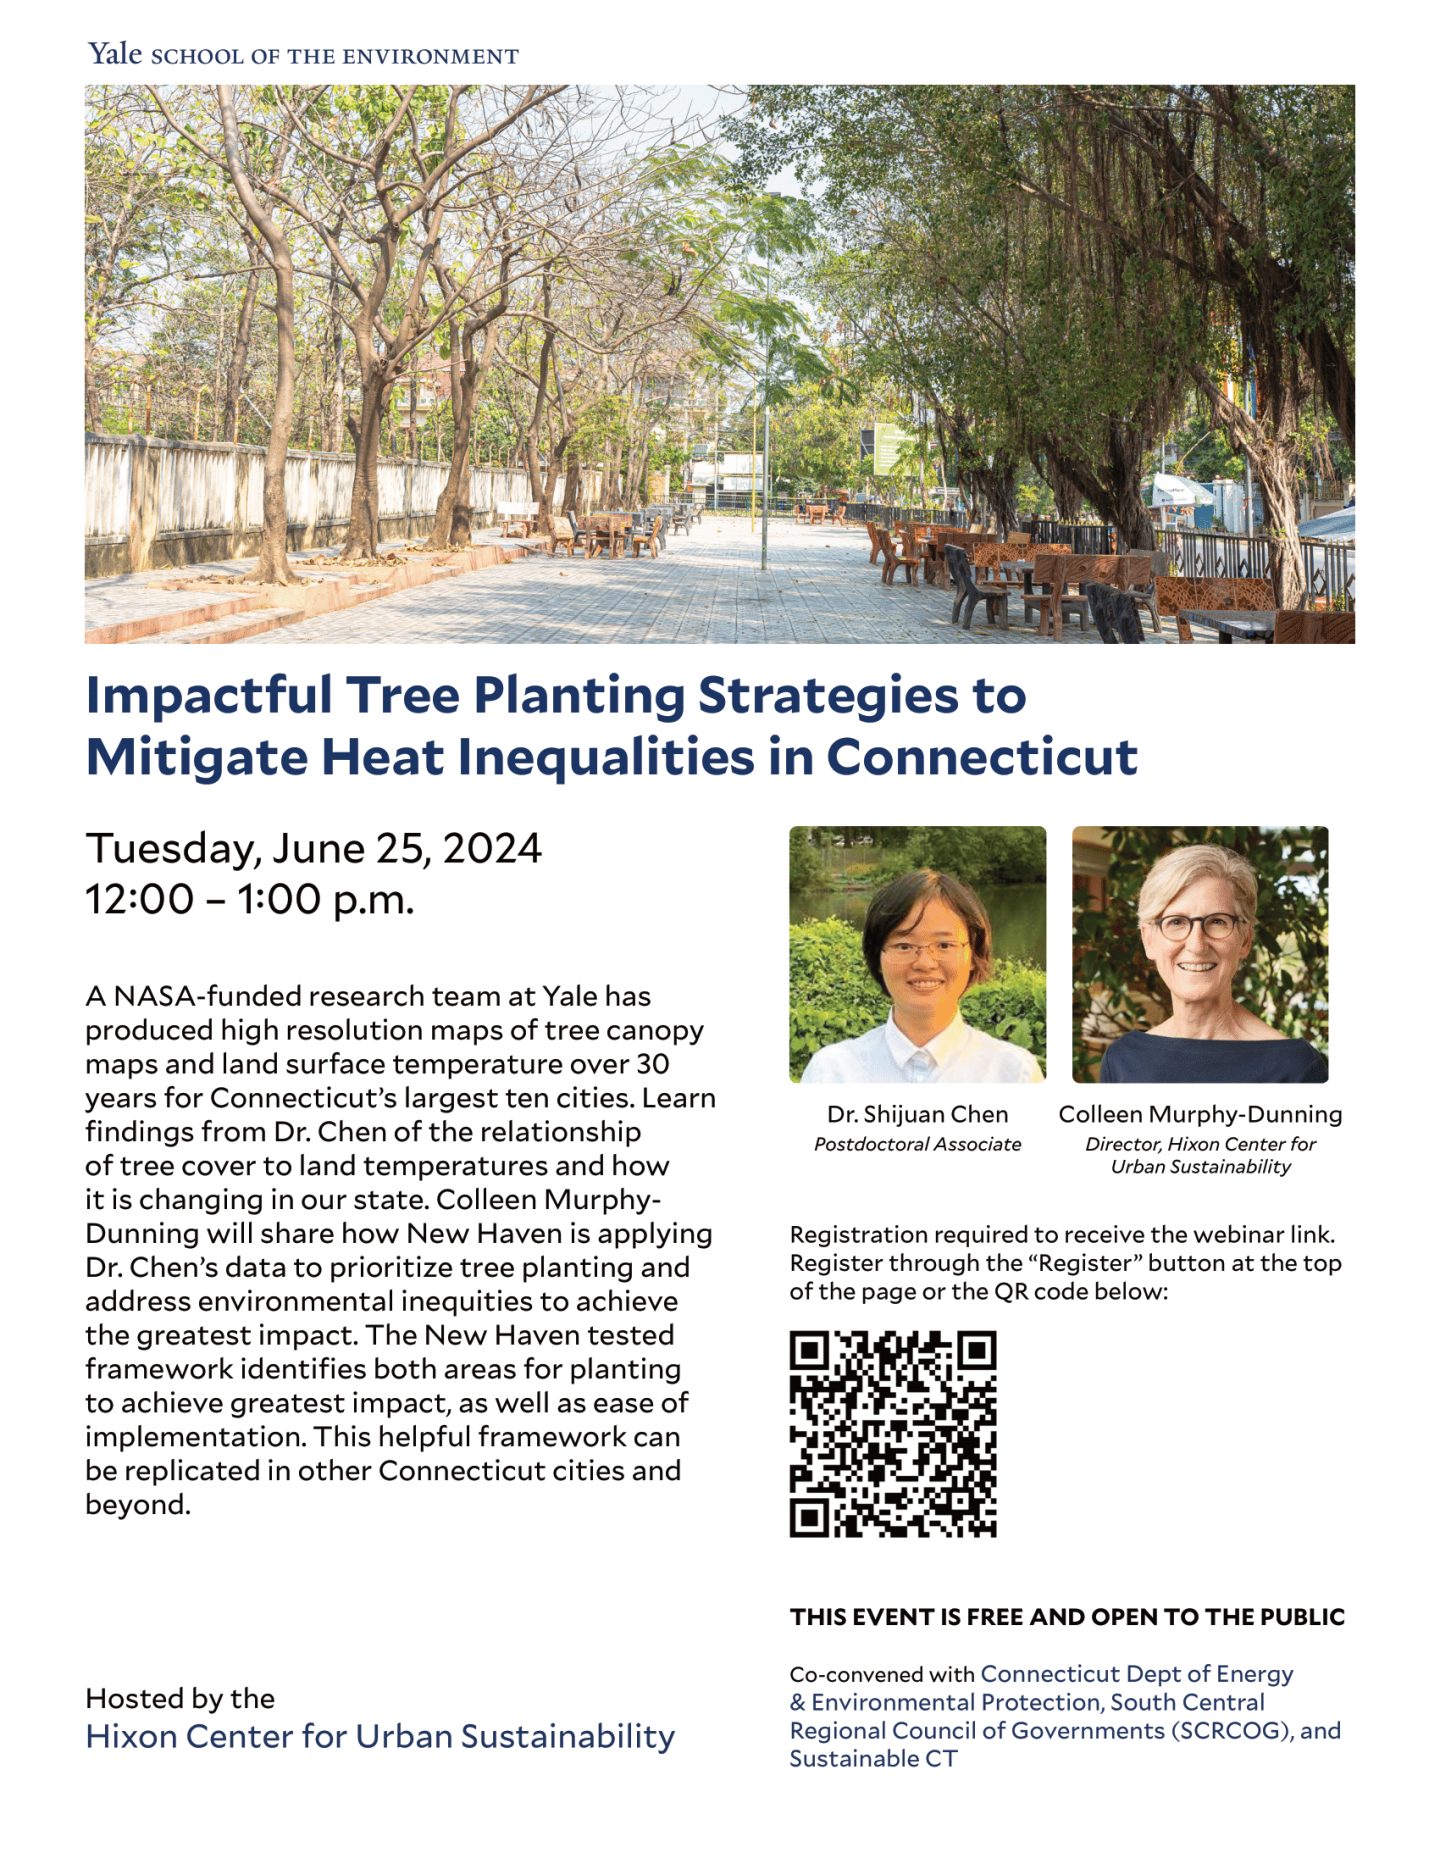 Details for event on Impactful Tree Planting Strategies to Mitigate Heat Inequalities in CT